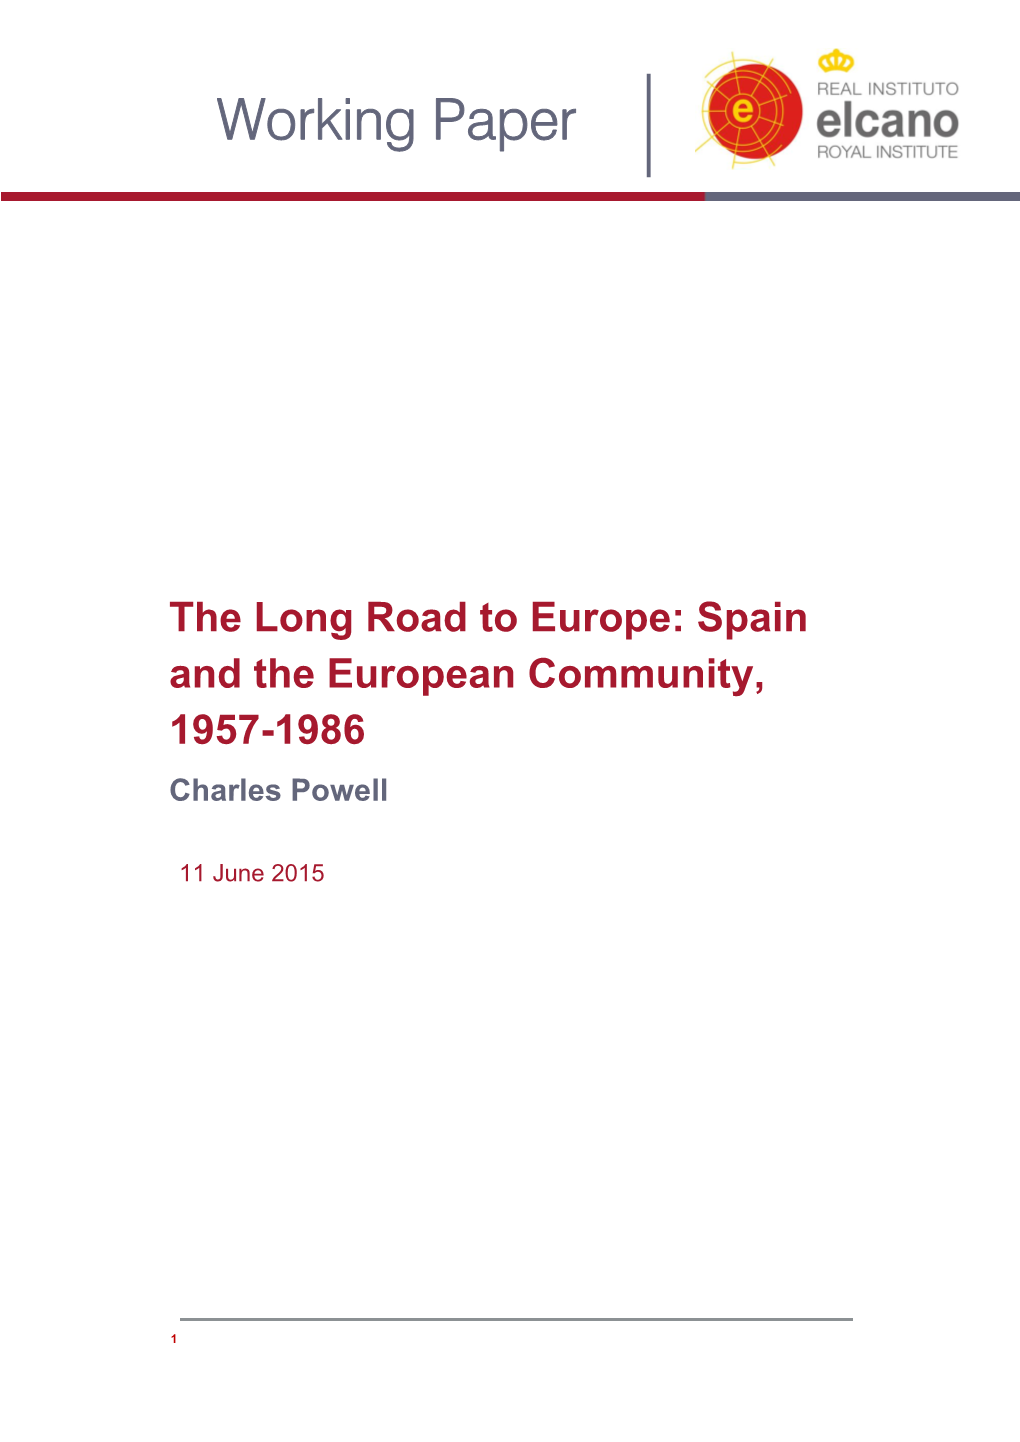 The Long Road to Europe: Spain and the European Community, 1957-1986 Charles Powell